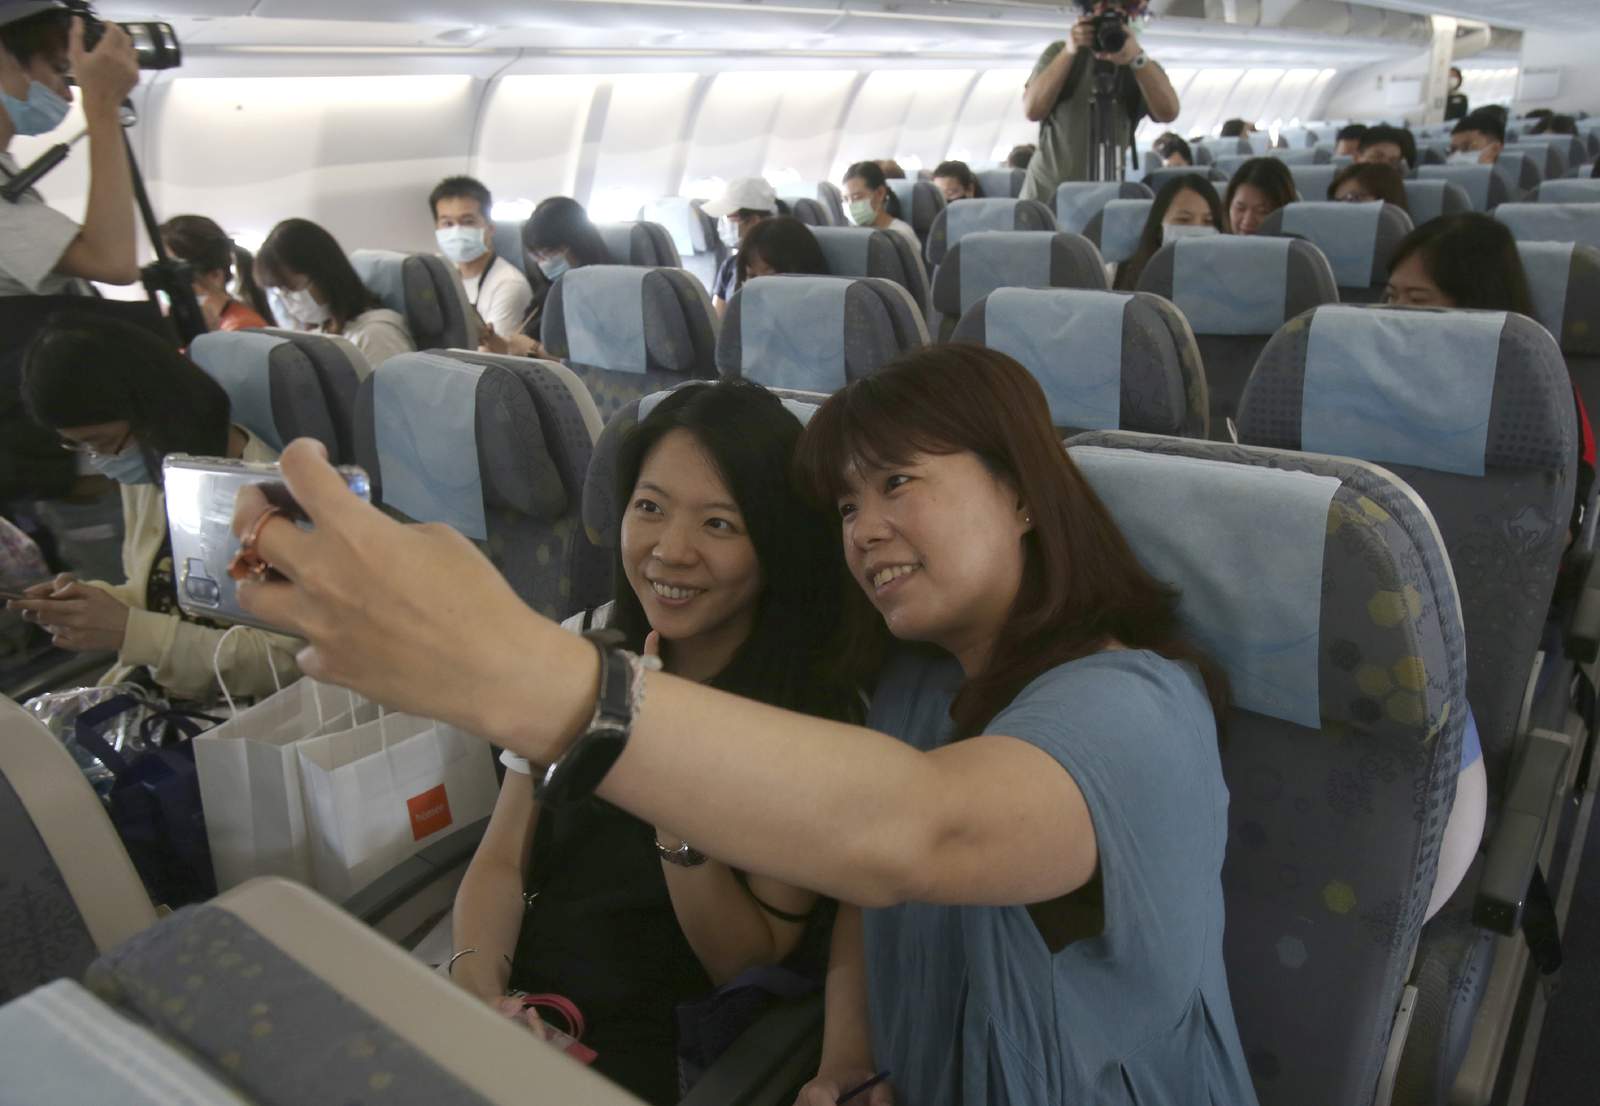 Would-be travelers in Taiwan live out dreams of flying again